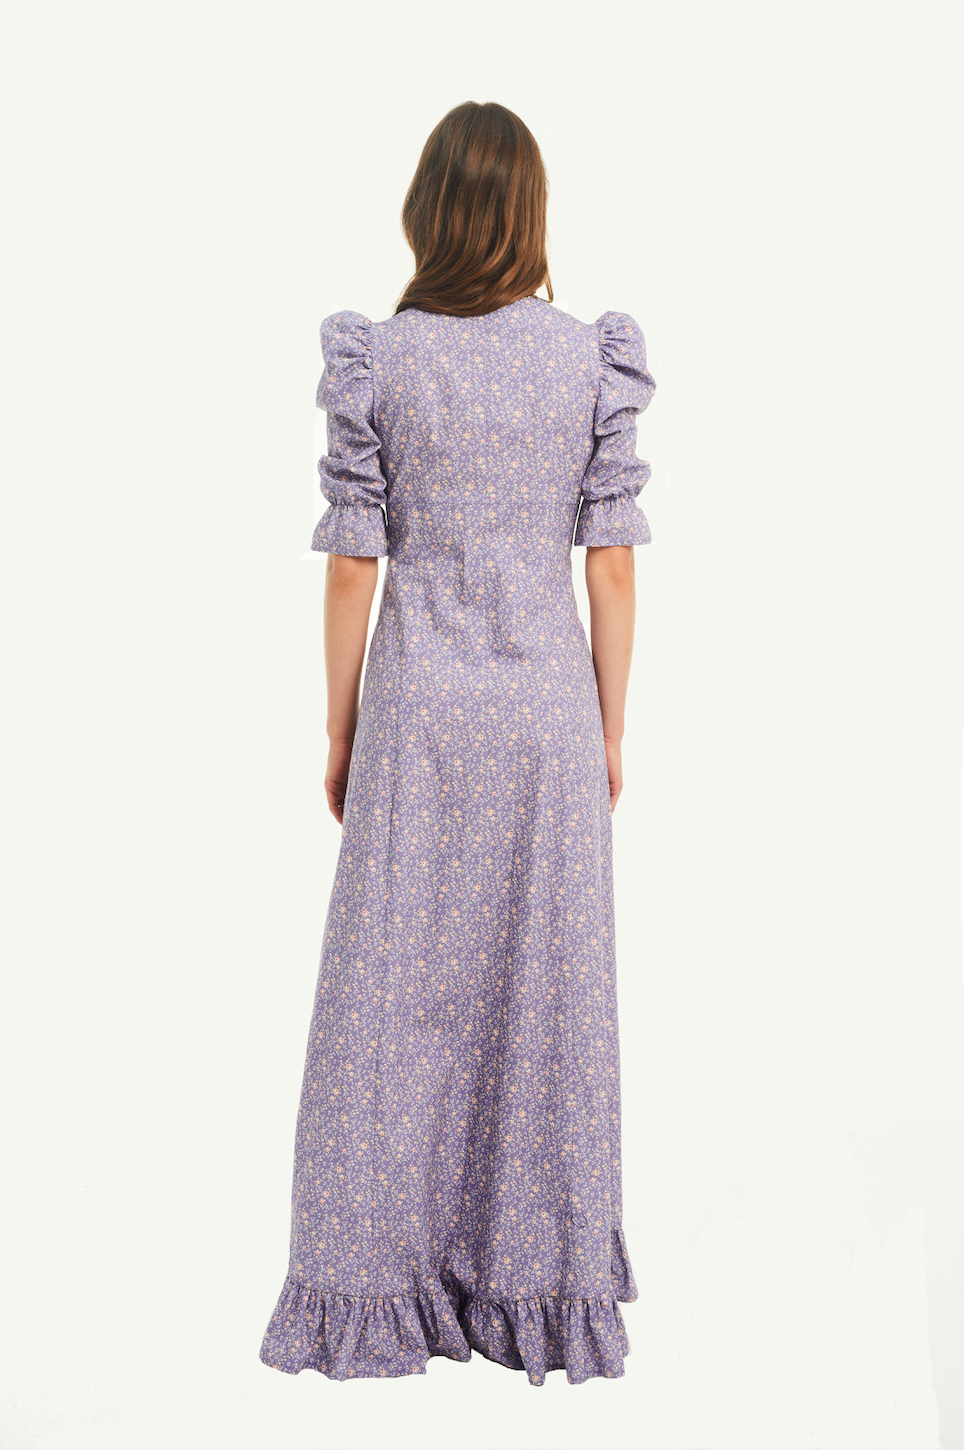 GIGLIO - long Versailles patterned cotton dress